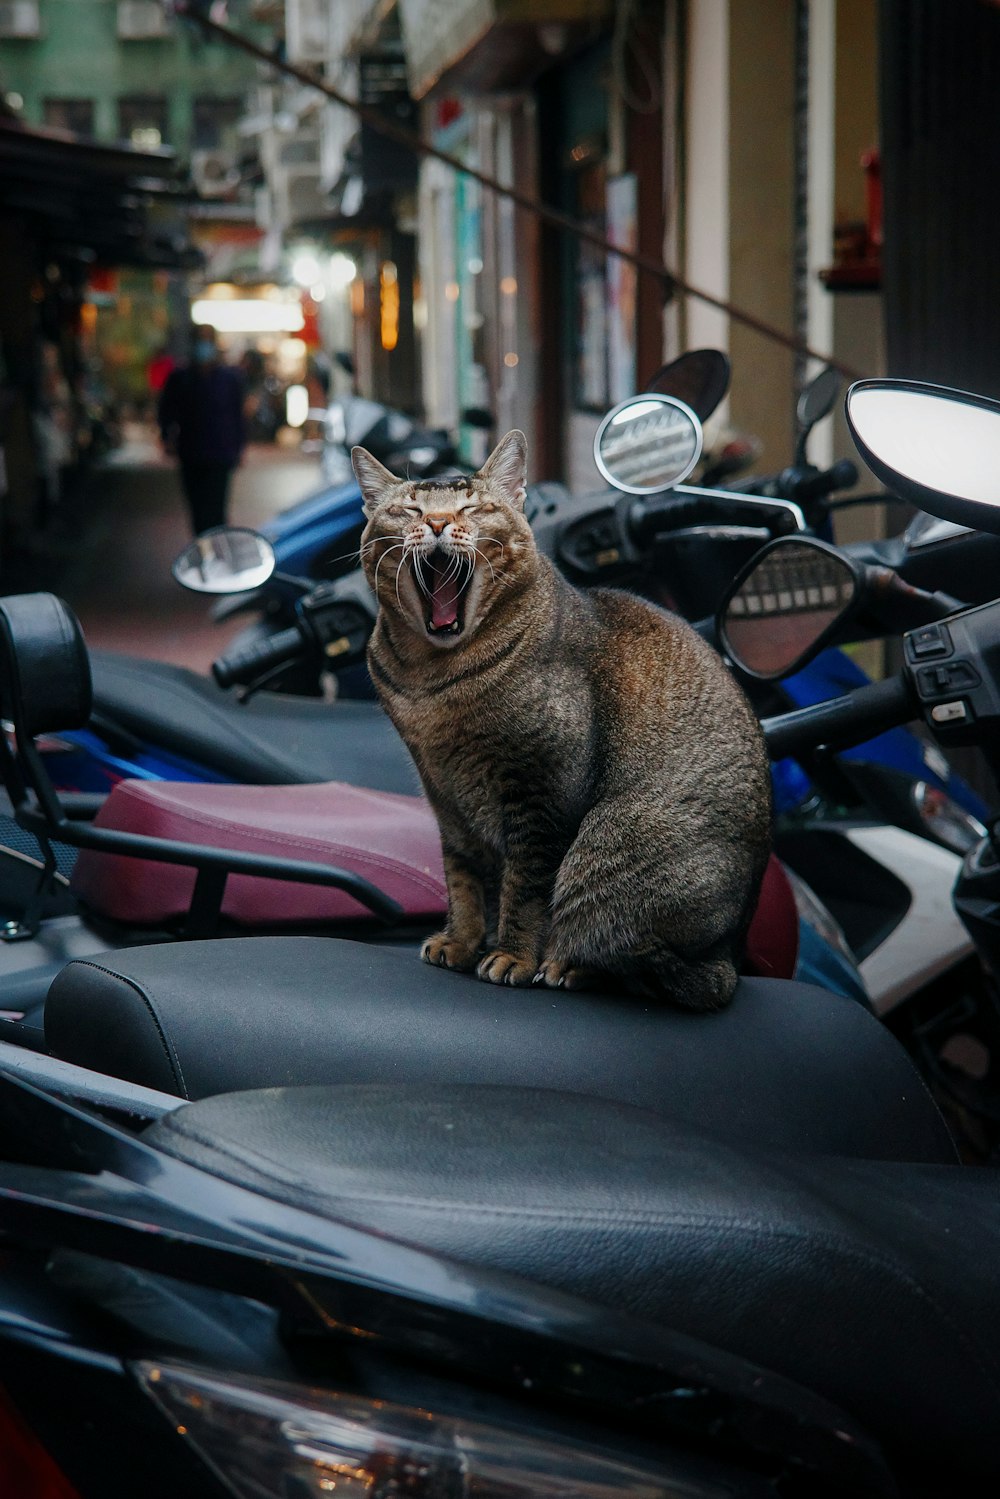 a cat yawns while sitting on a motorcycle